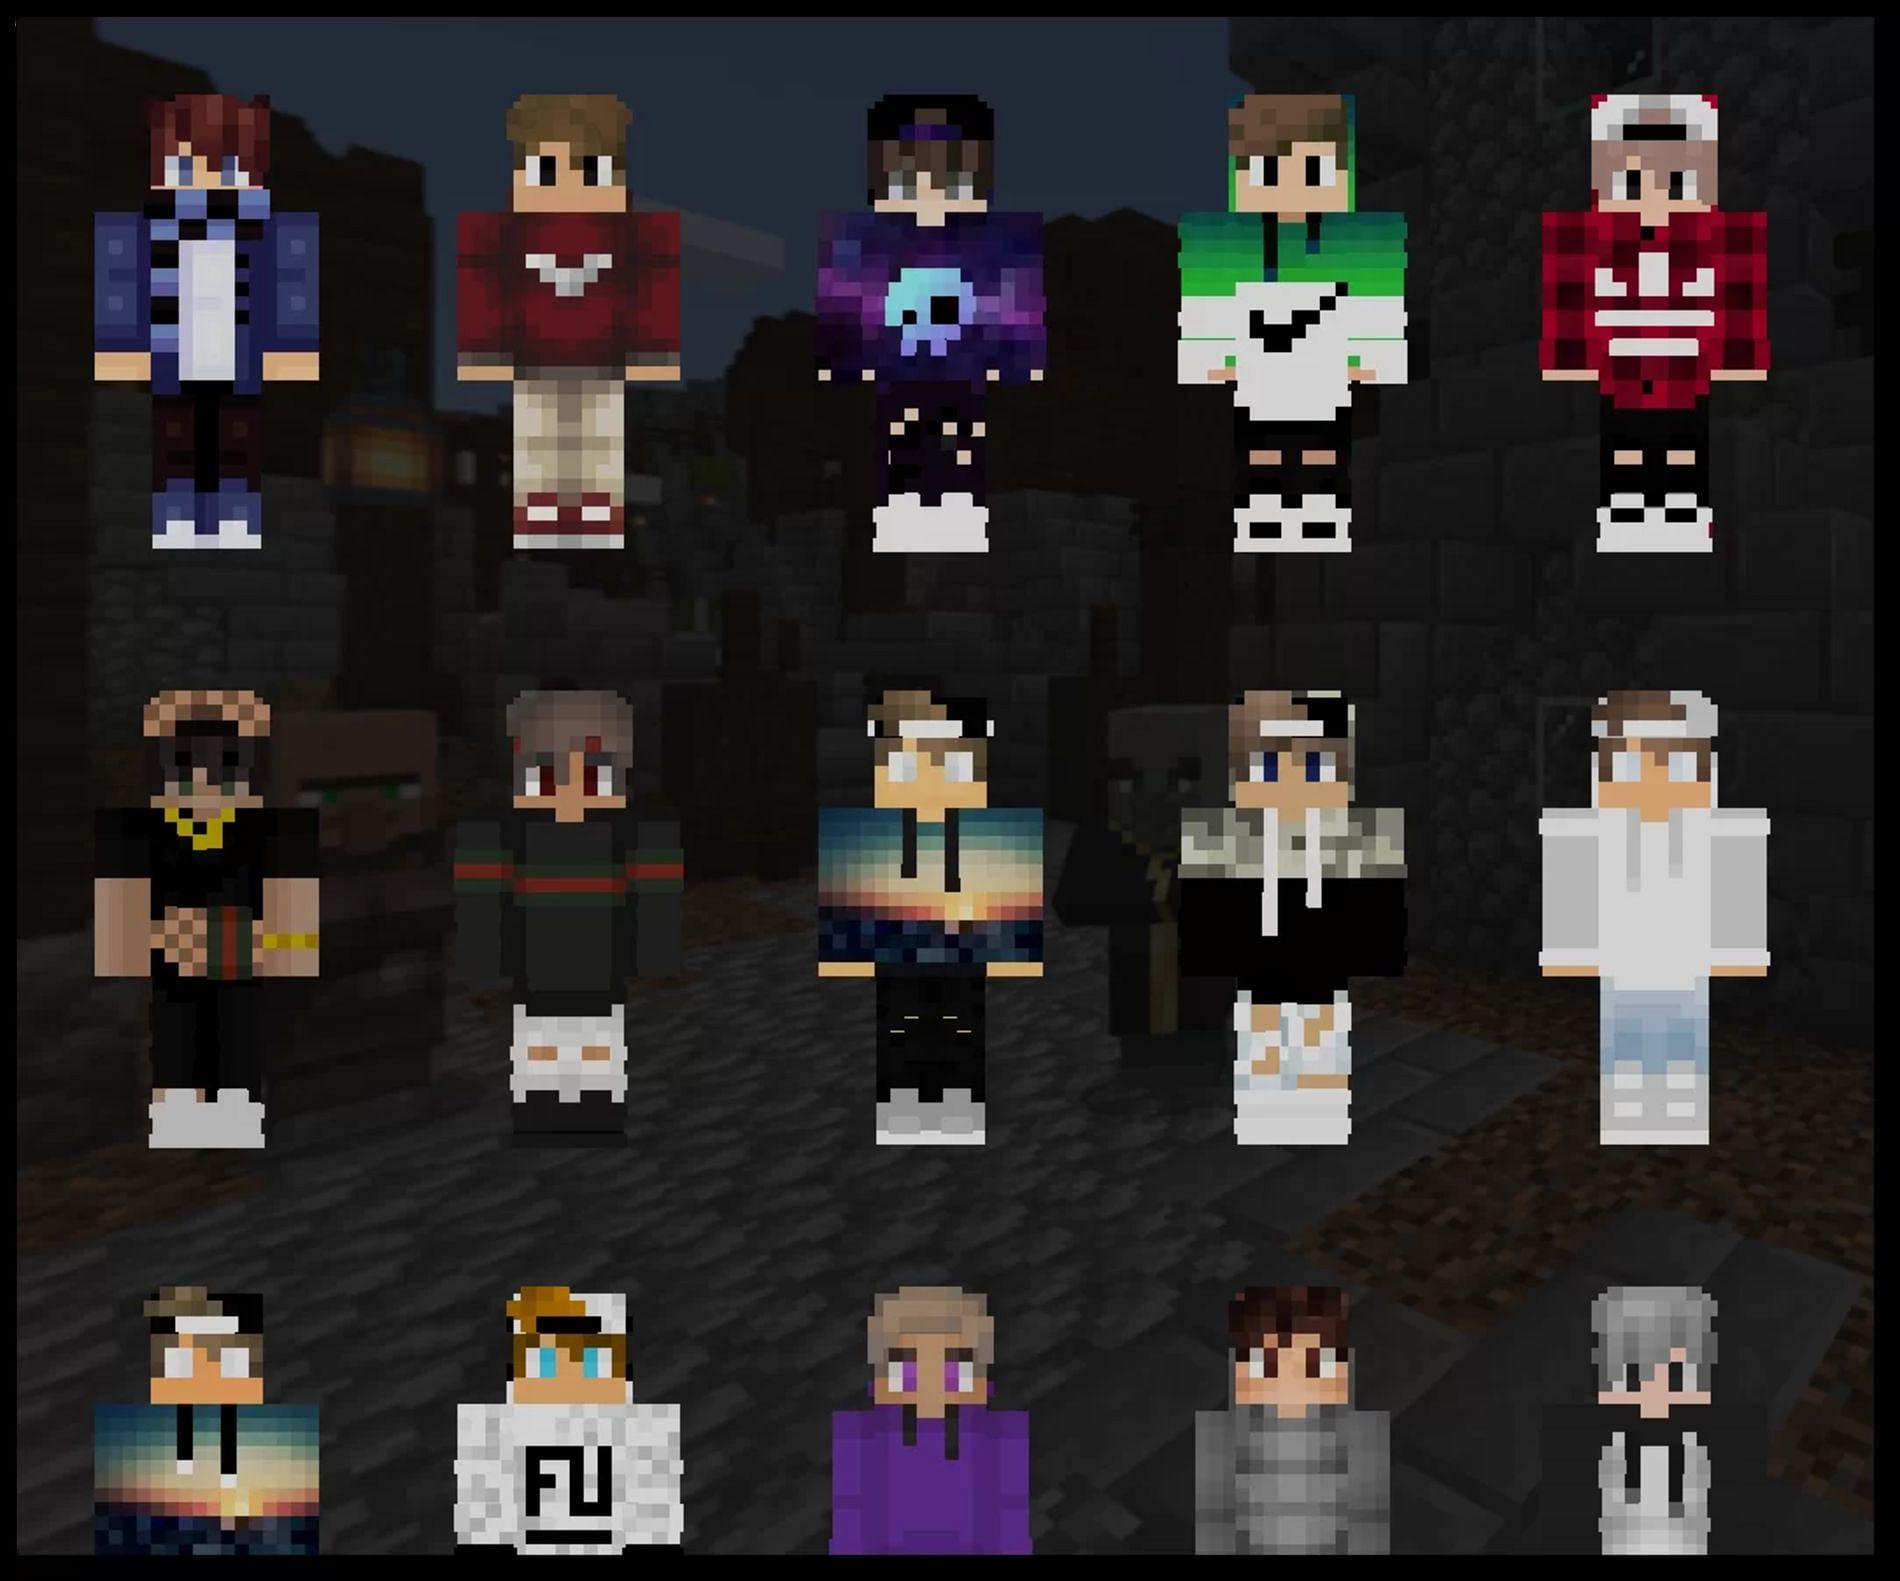 Custom skins that can be imported into Minecraft (Image via CDsmythe)